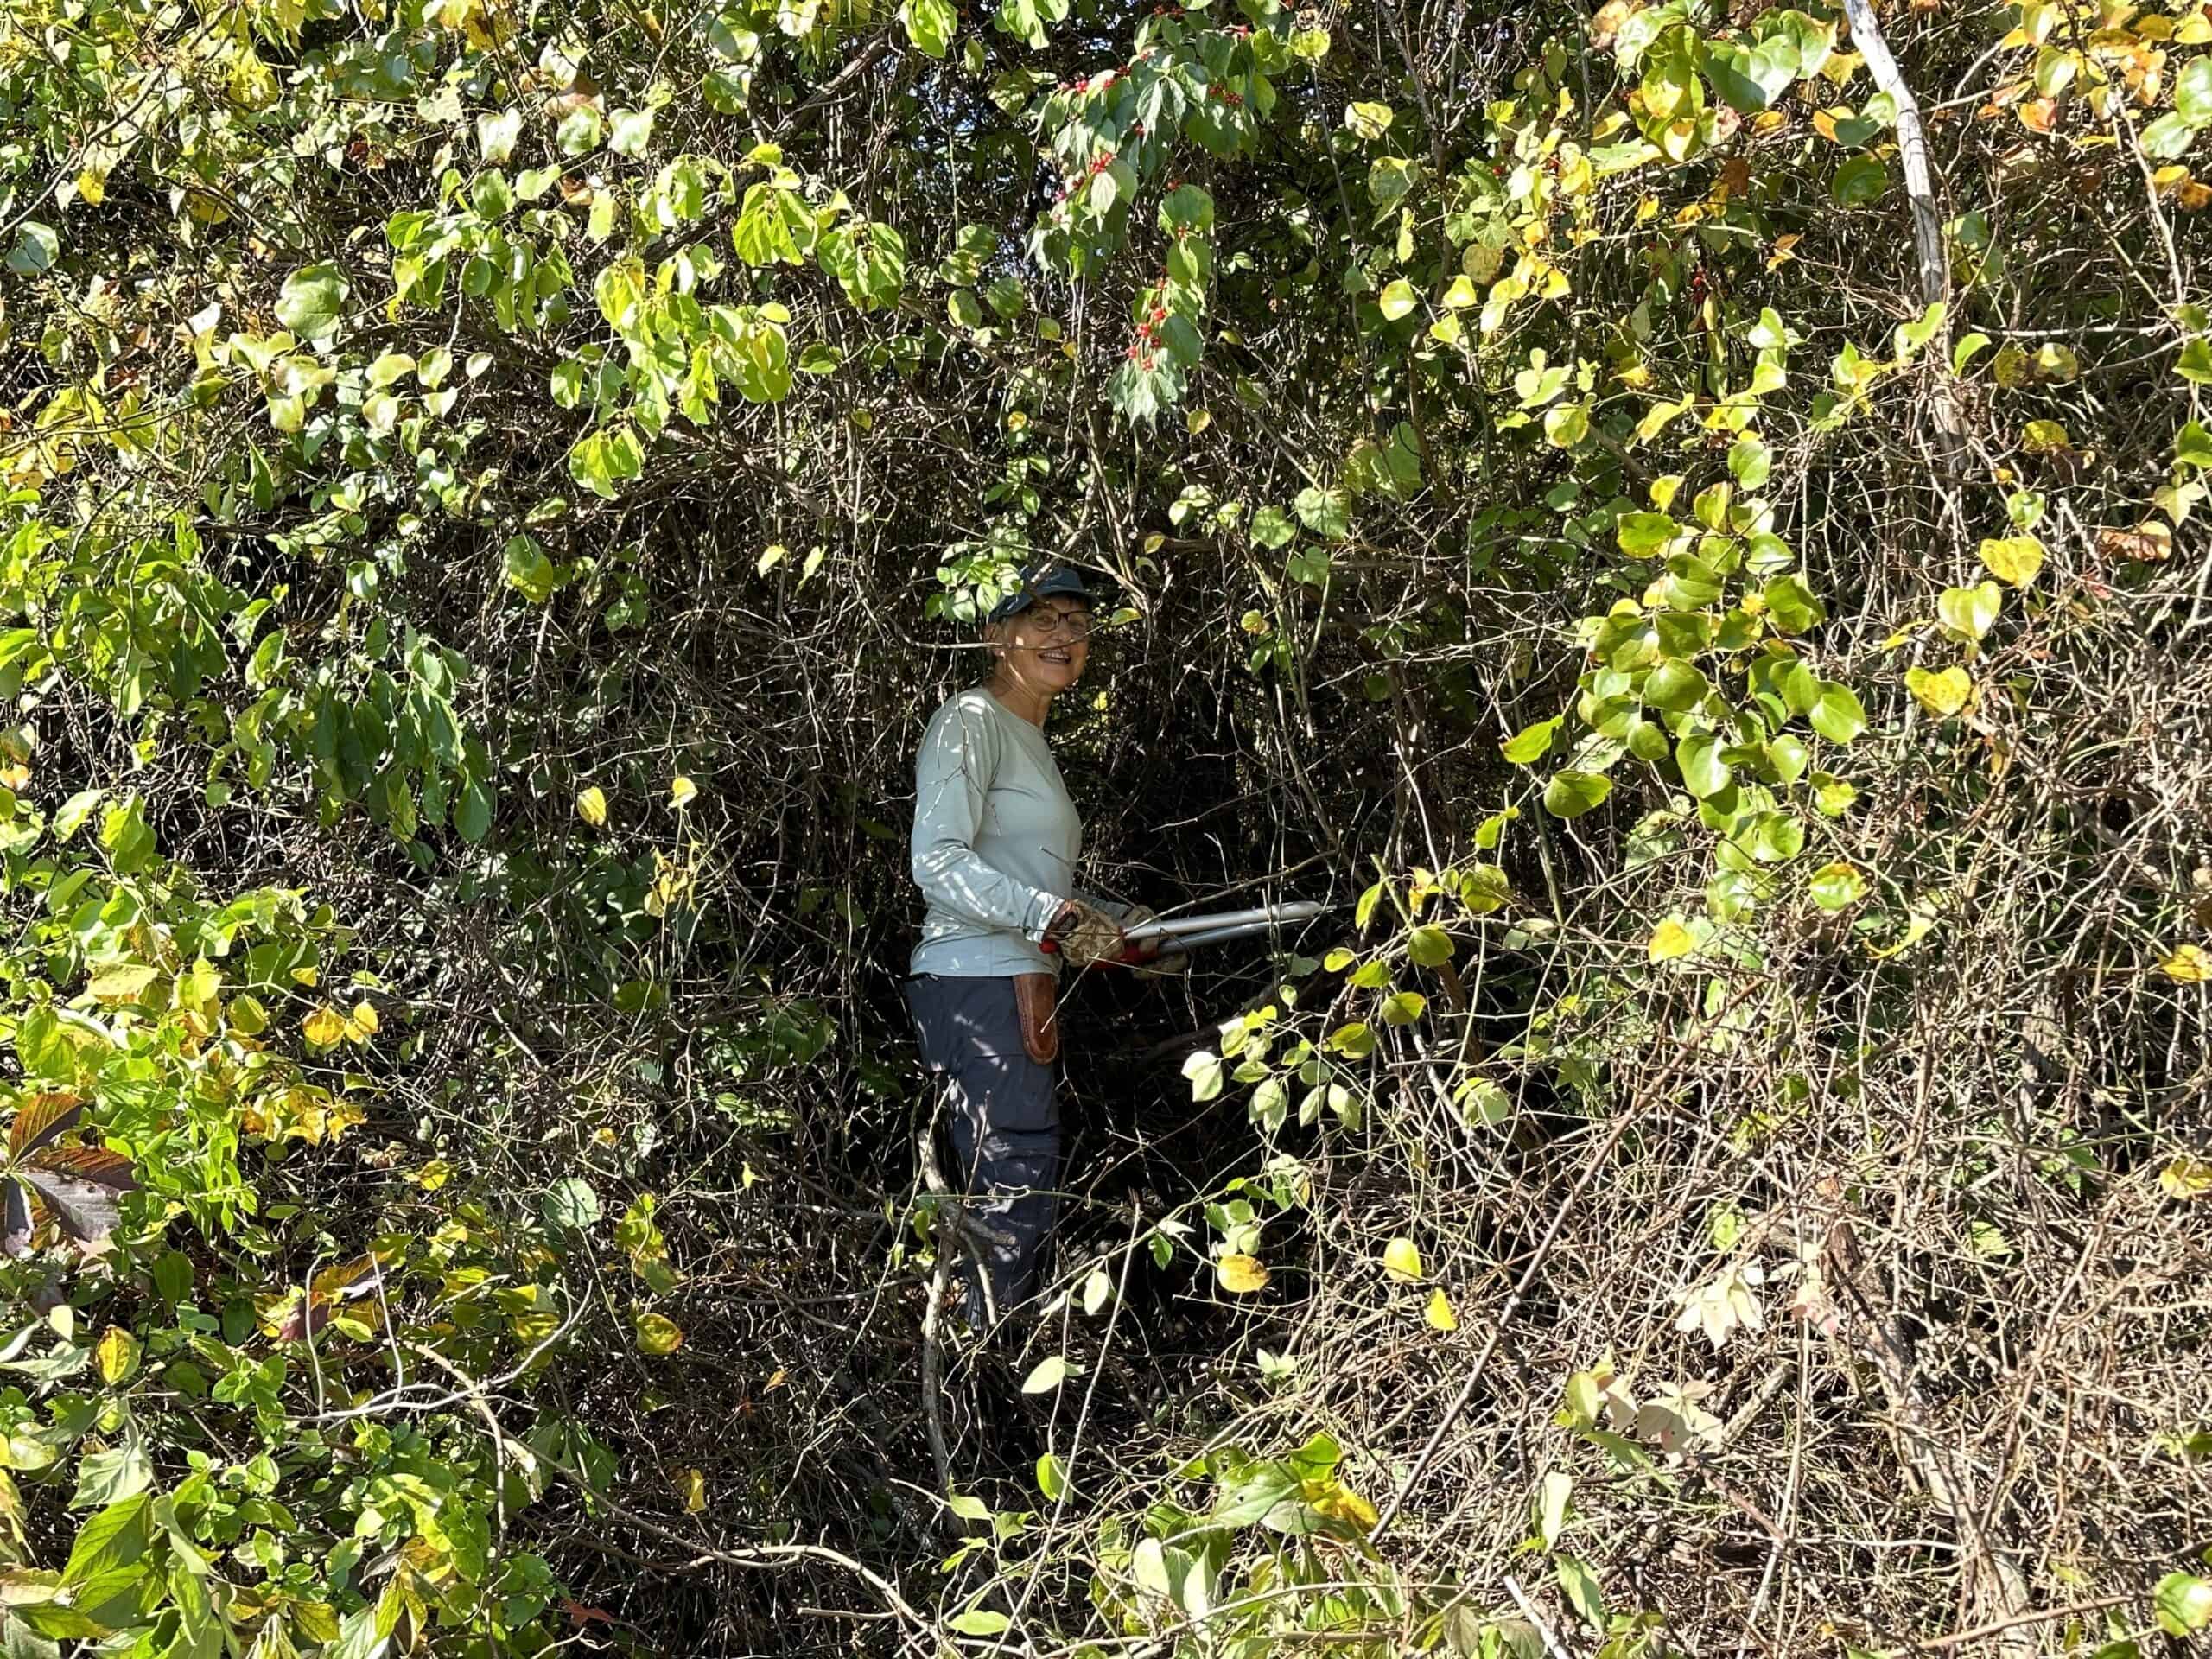 A volunteer posing with loppers among invasive vines she is cutting